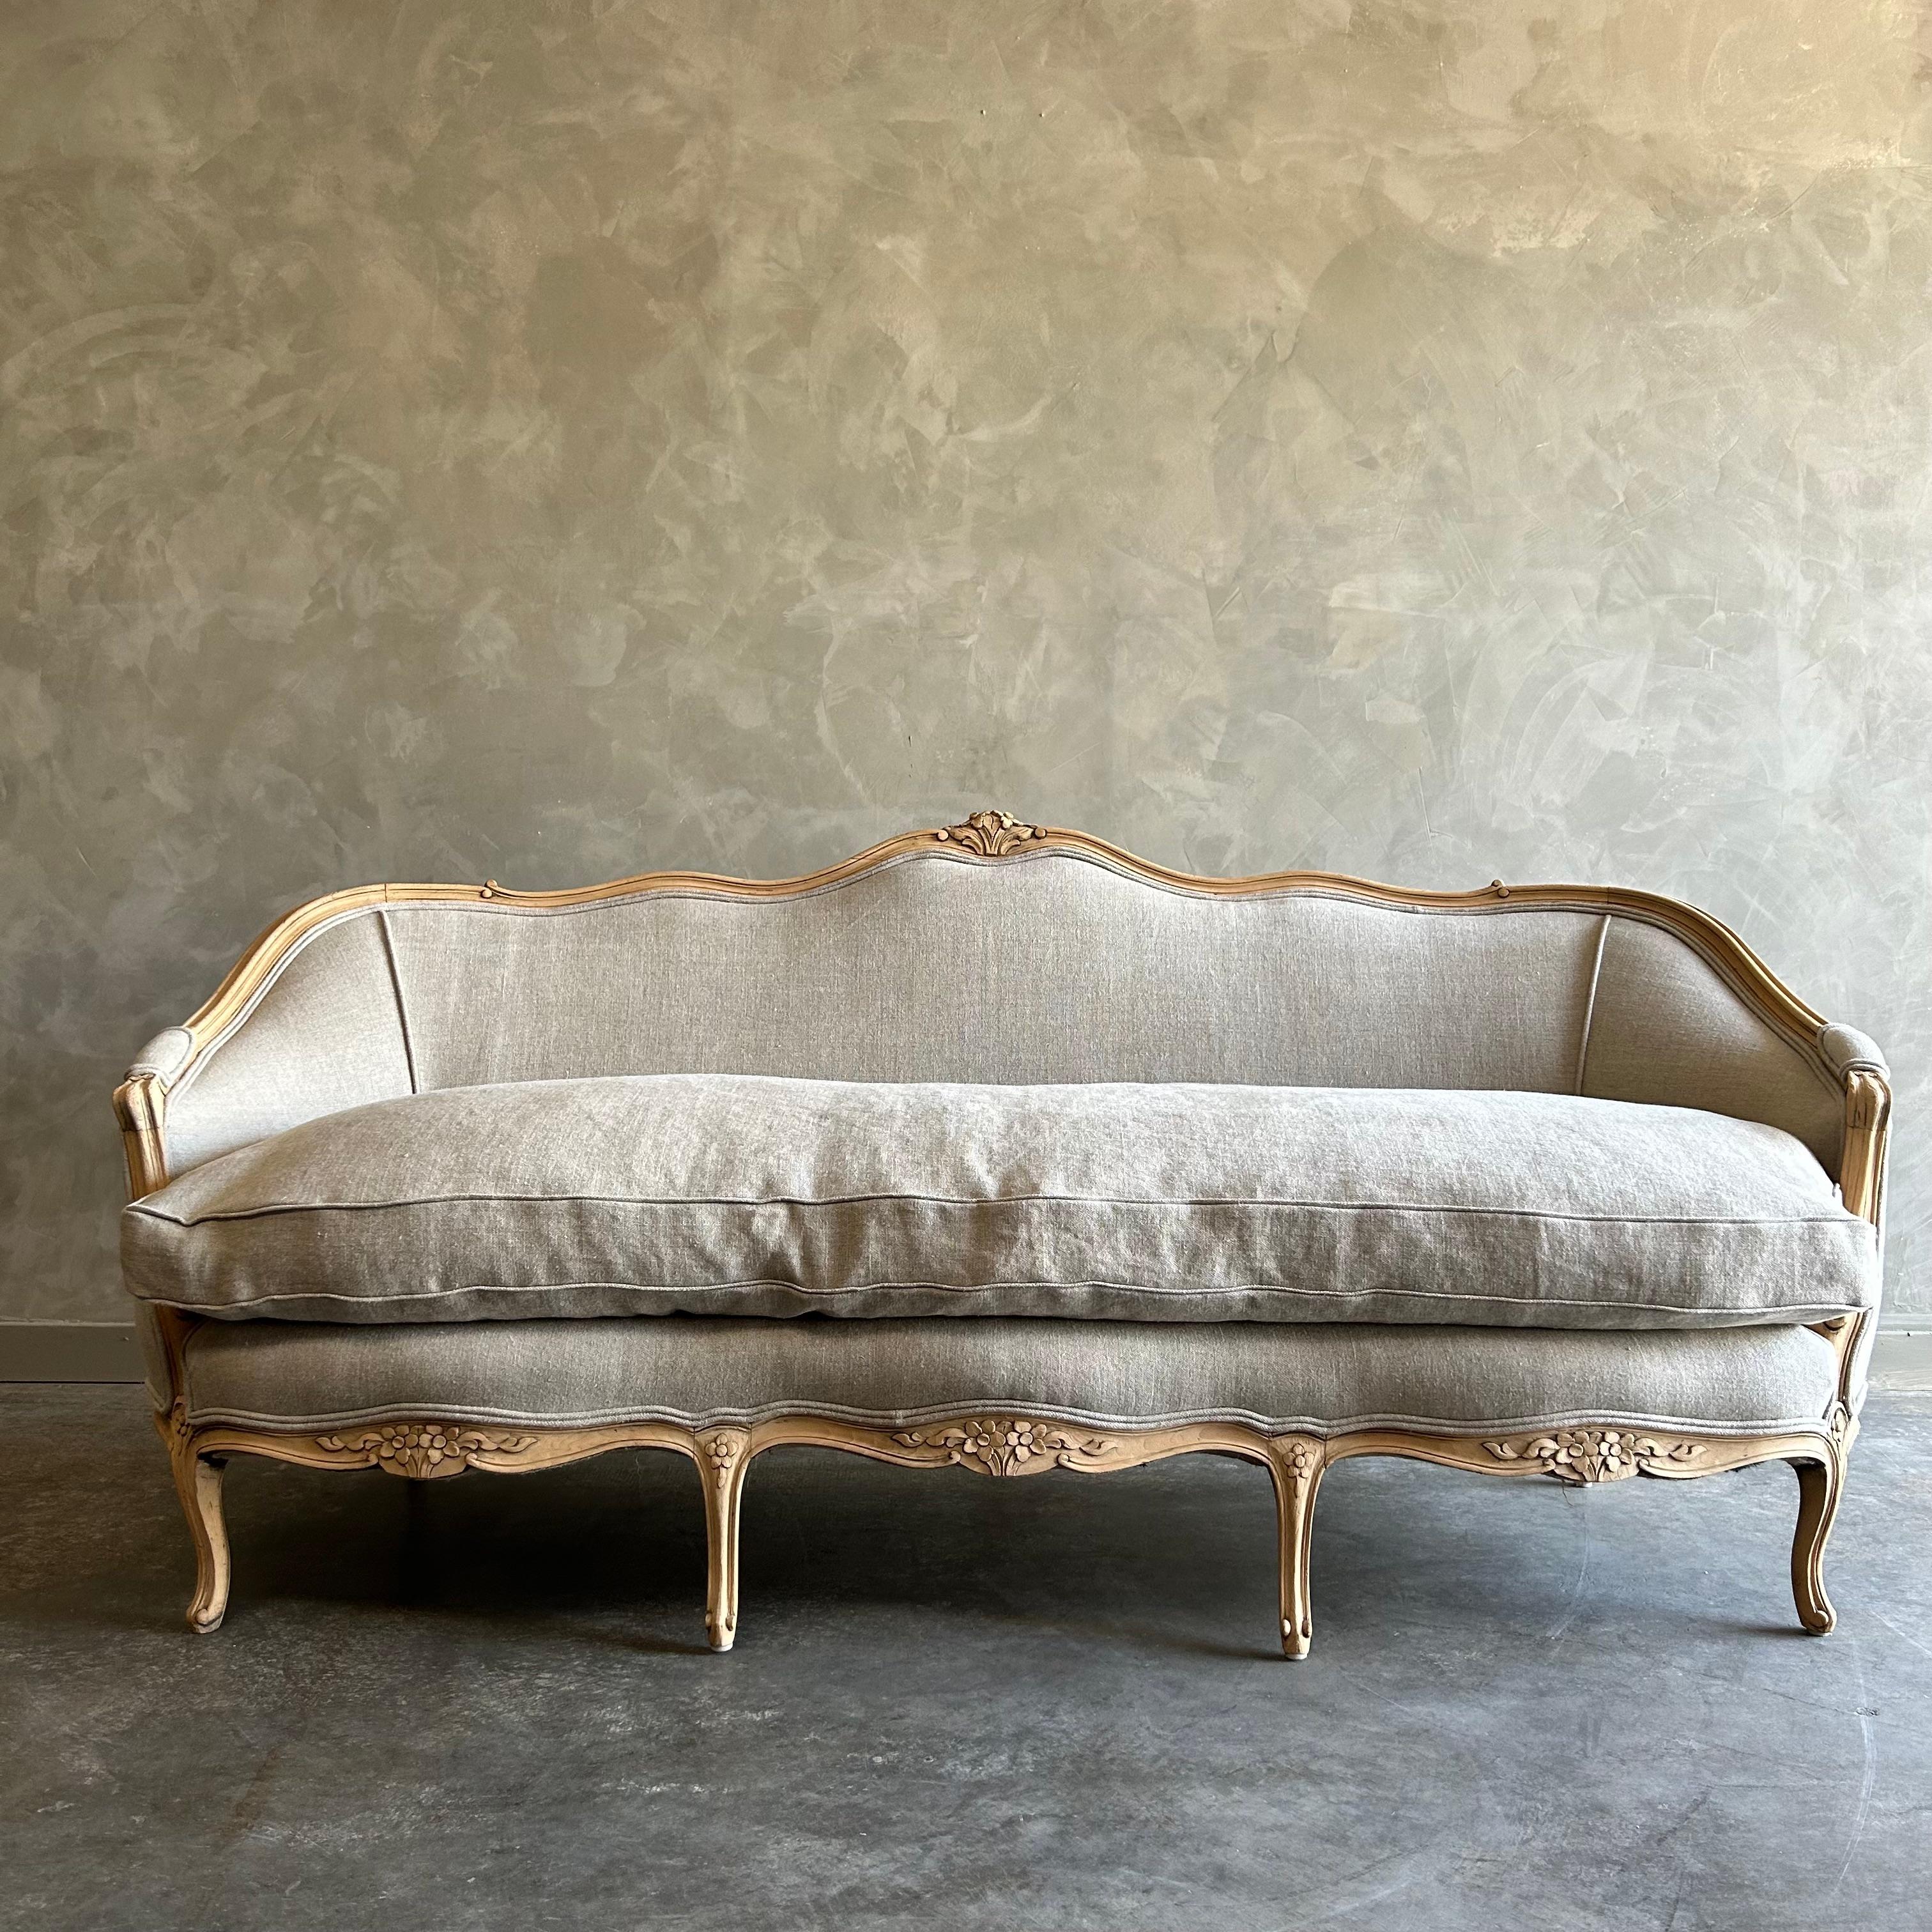 Antique French Louis XV style sofa 
Size: 78”w x 31”d x 35”h 
Seat Height :19”
Seat Depth :22”
Arm Height:24”
Beautiful French style sofa in a weathered aged oak finish. The frame has been stripped of its finish, leaving a beautiful antique